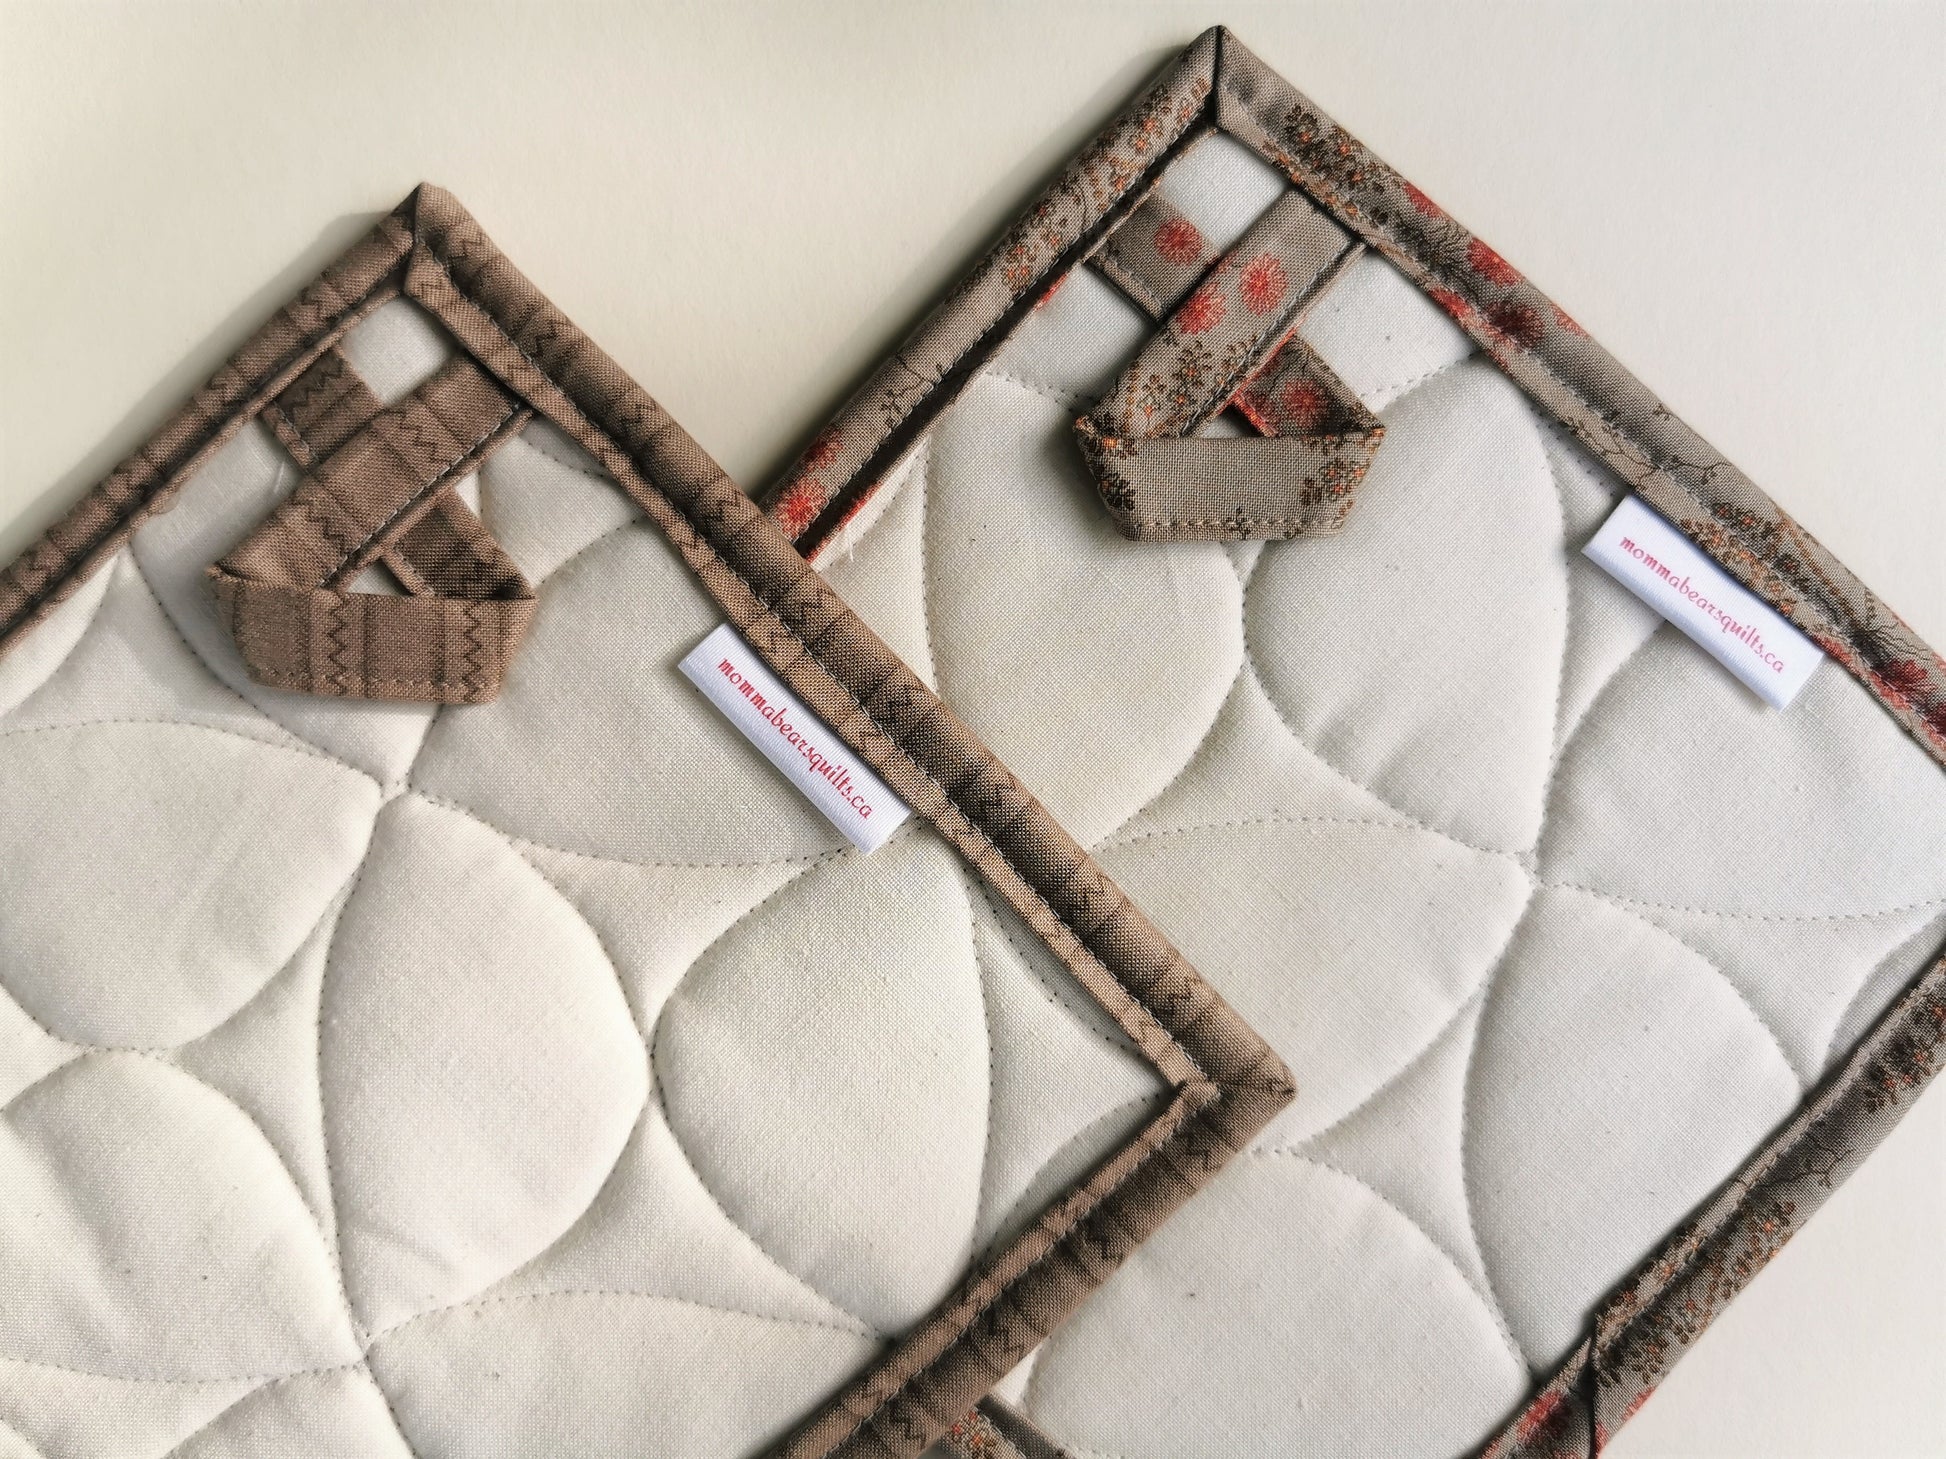 the quilted patchwork potholders back view is showing the hanging loops and the stitching texture.